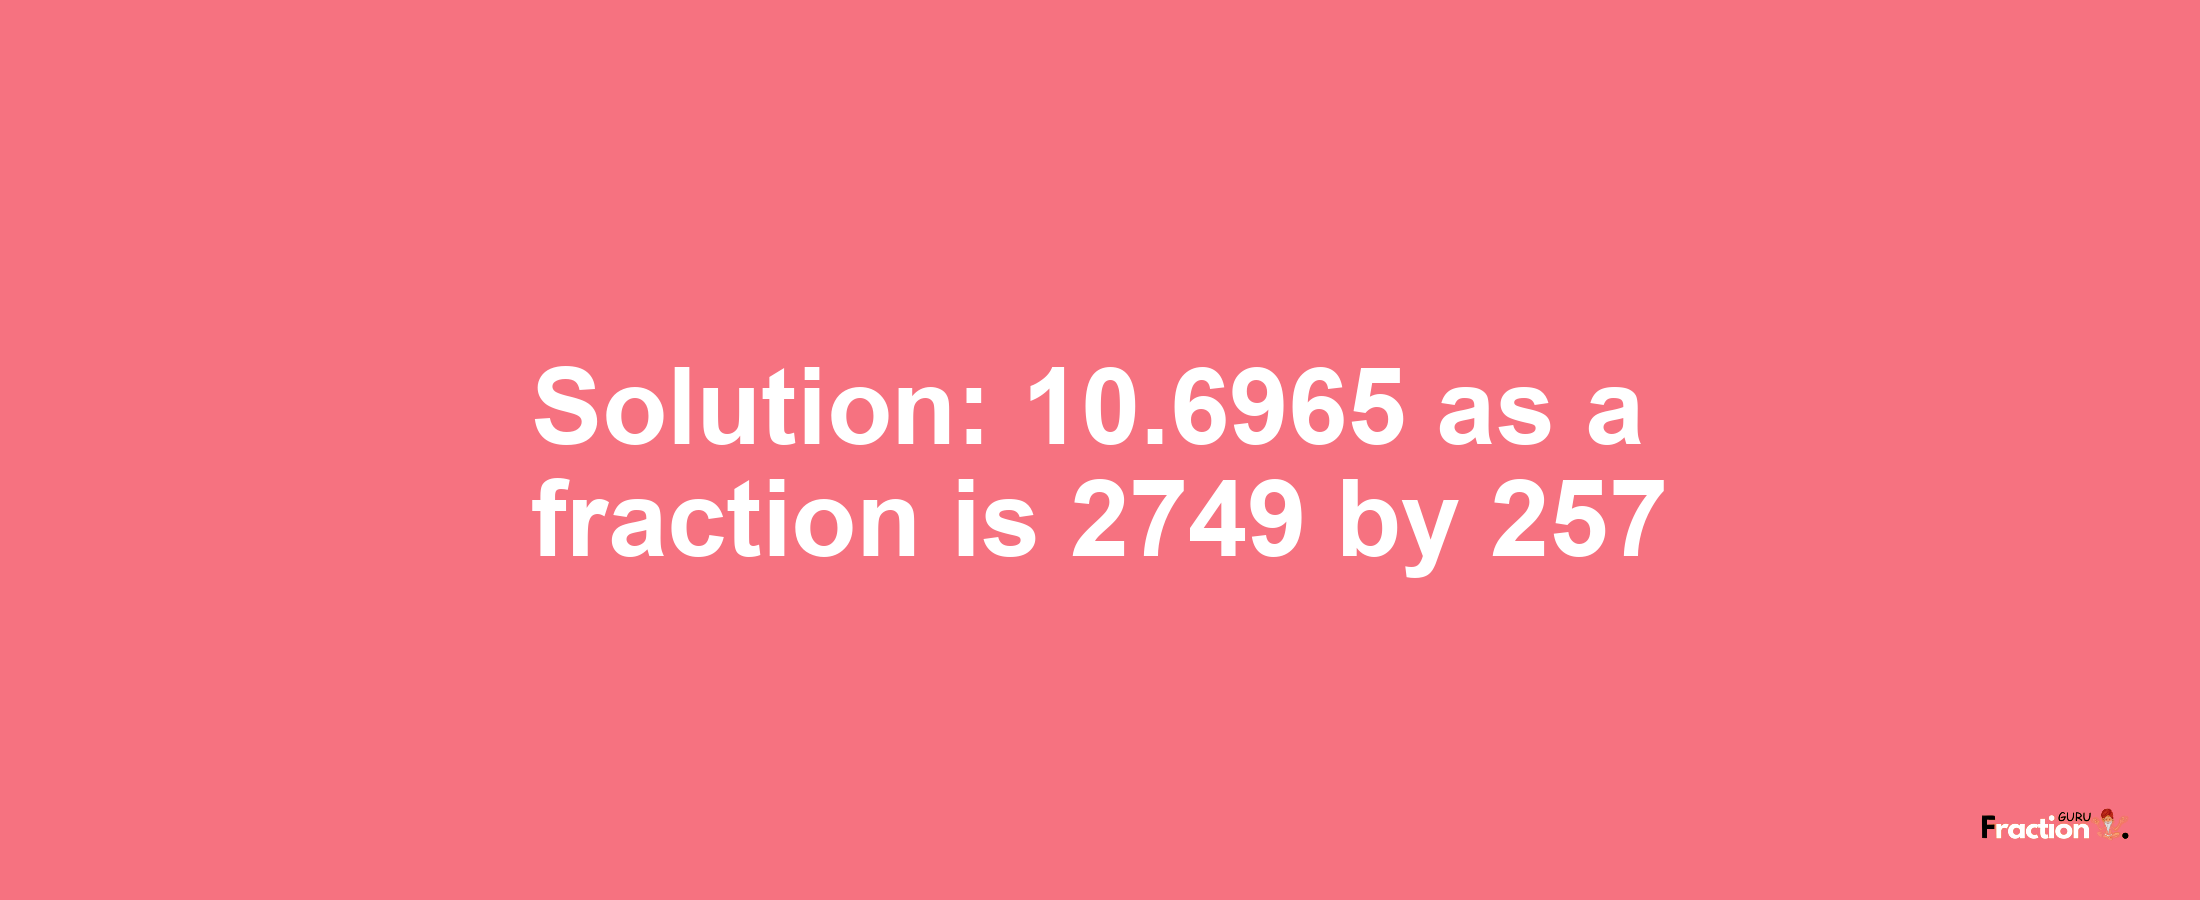 Solution:10.6965 as a fraction is 2749/257